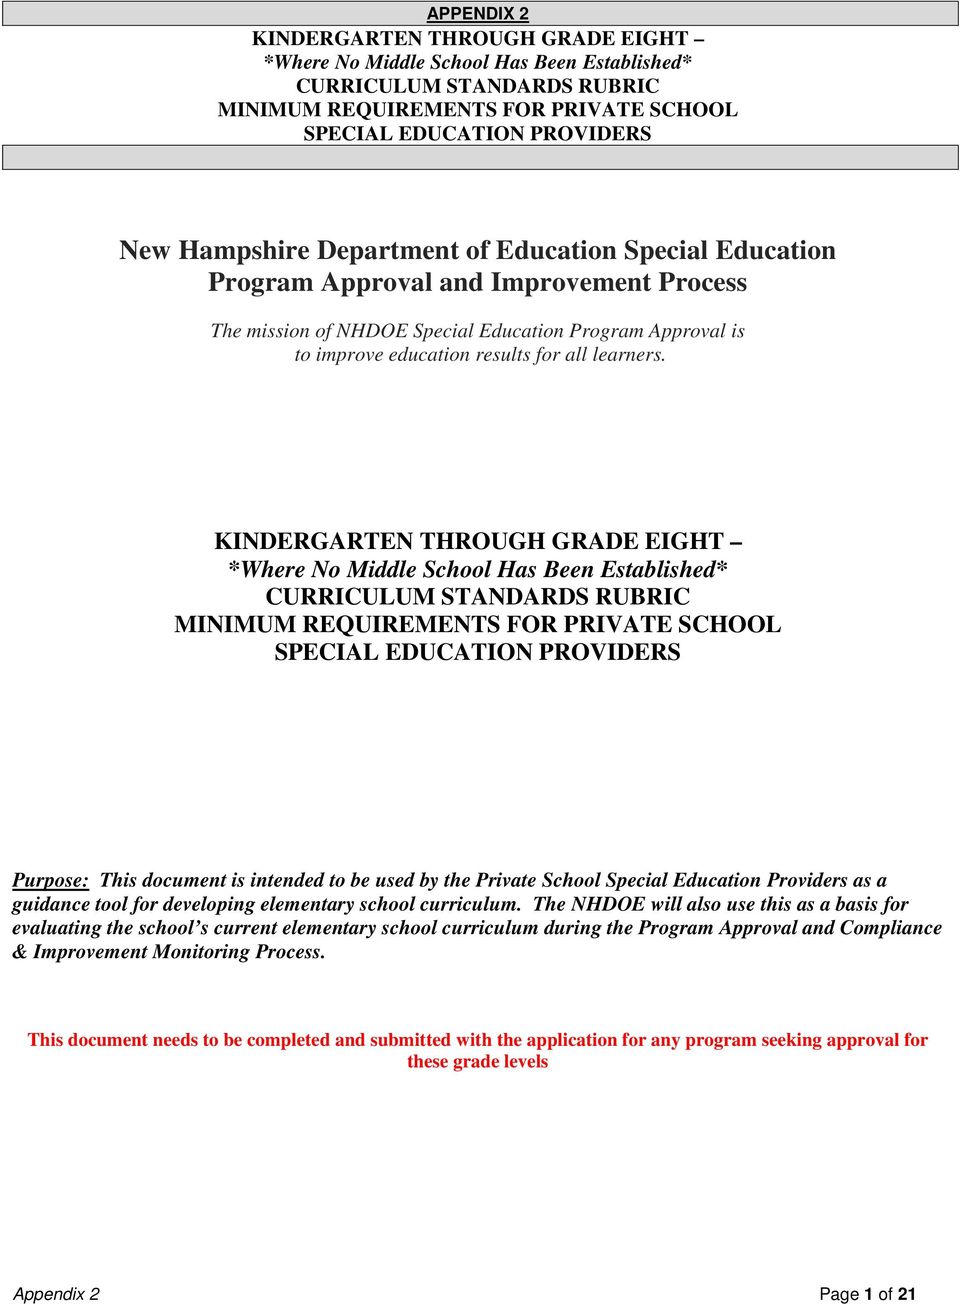 Purpose: This document is intended to be used by the Private School Special Education Providers as a guidance tool for developing elementary school.